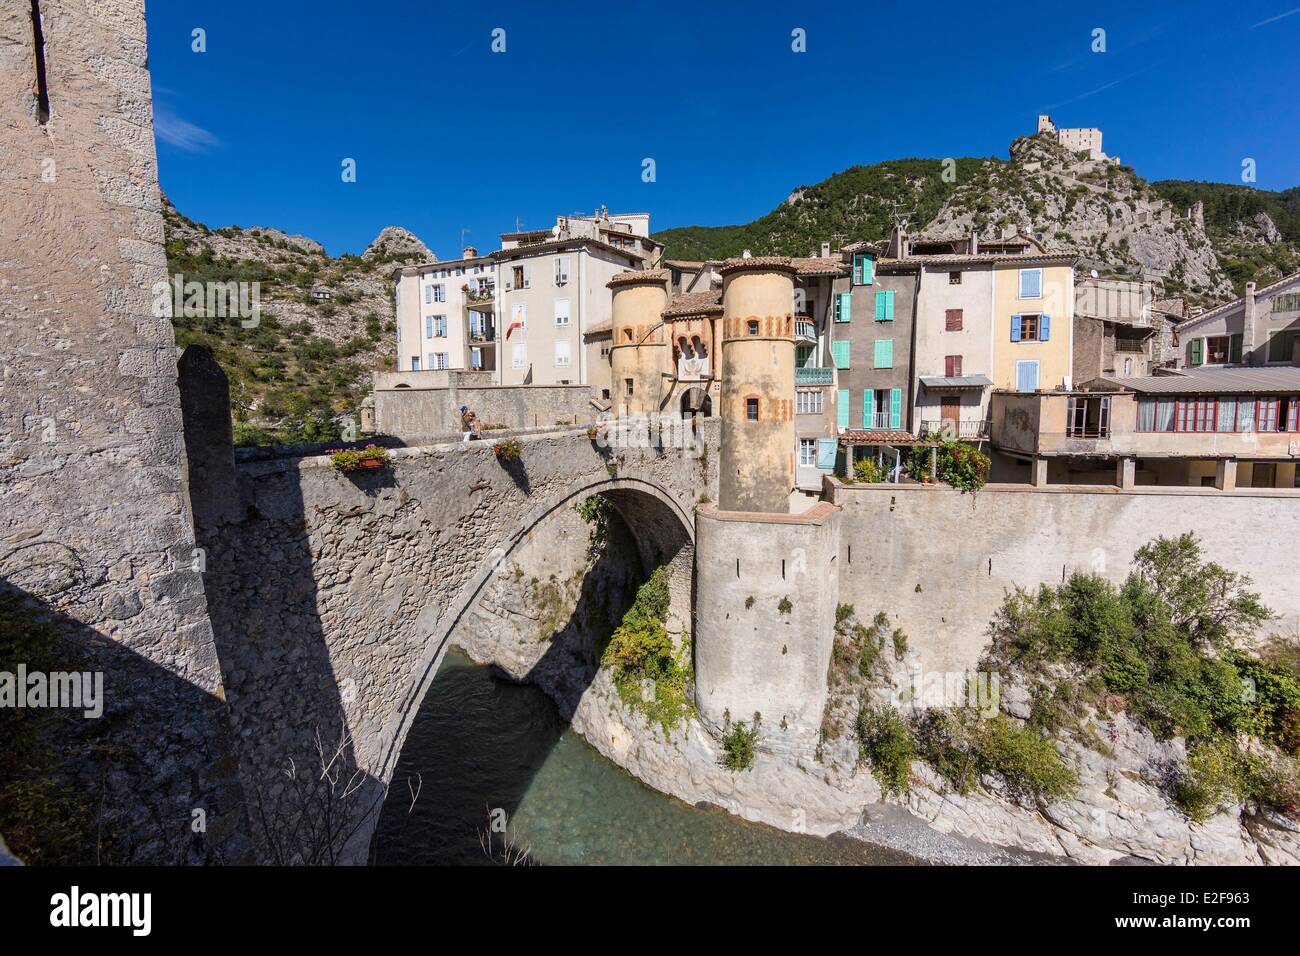 France, Alpes de Haute Provence, Entrevaux Medieval city fortified by Vauban Stock Photo